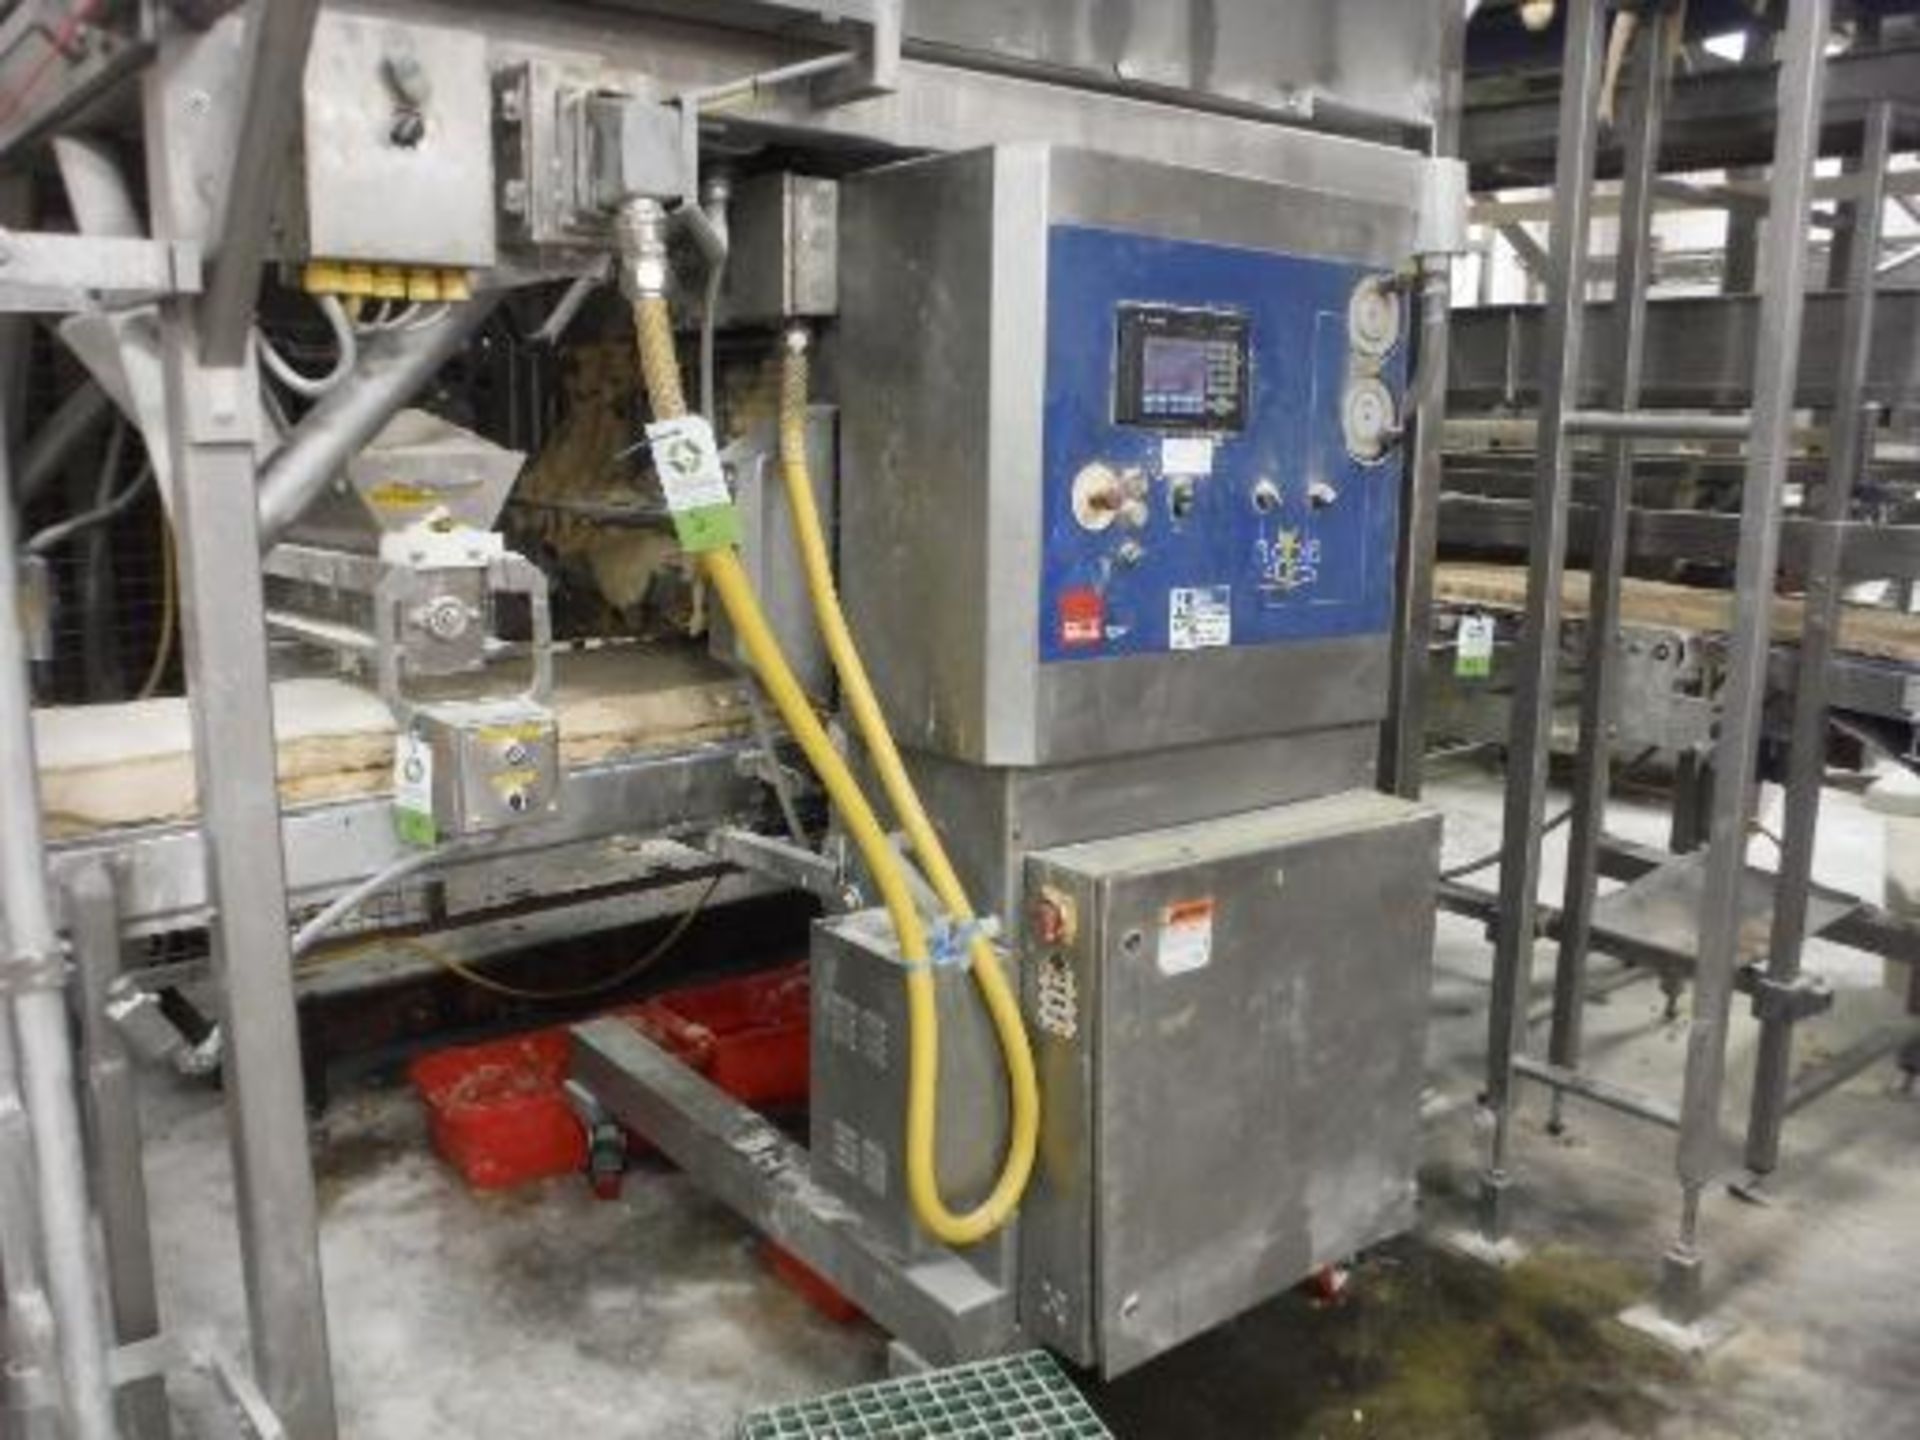 Fritsch 3 roll extruder, Model RDP 600 05247-051.00, SN 9711-0016, approx. 26 in. wide rolls,